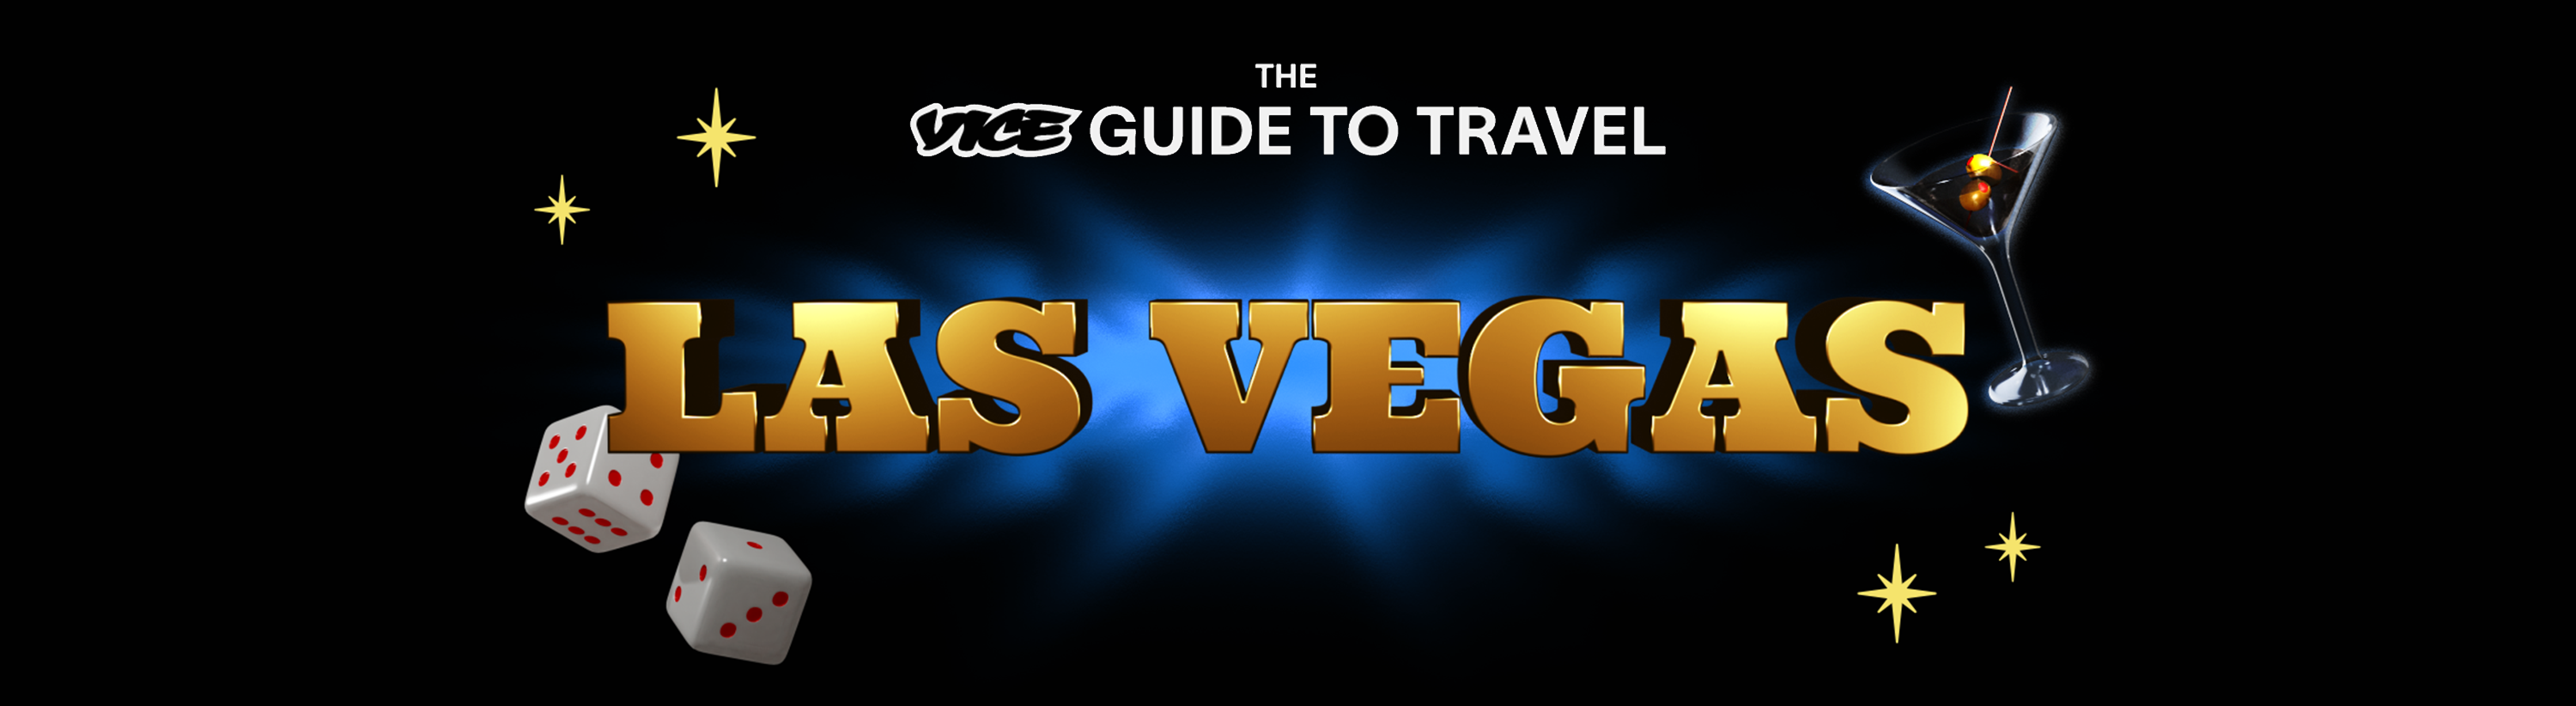 The VICE Guide to Travel Las Vegas Logo